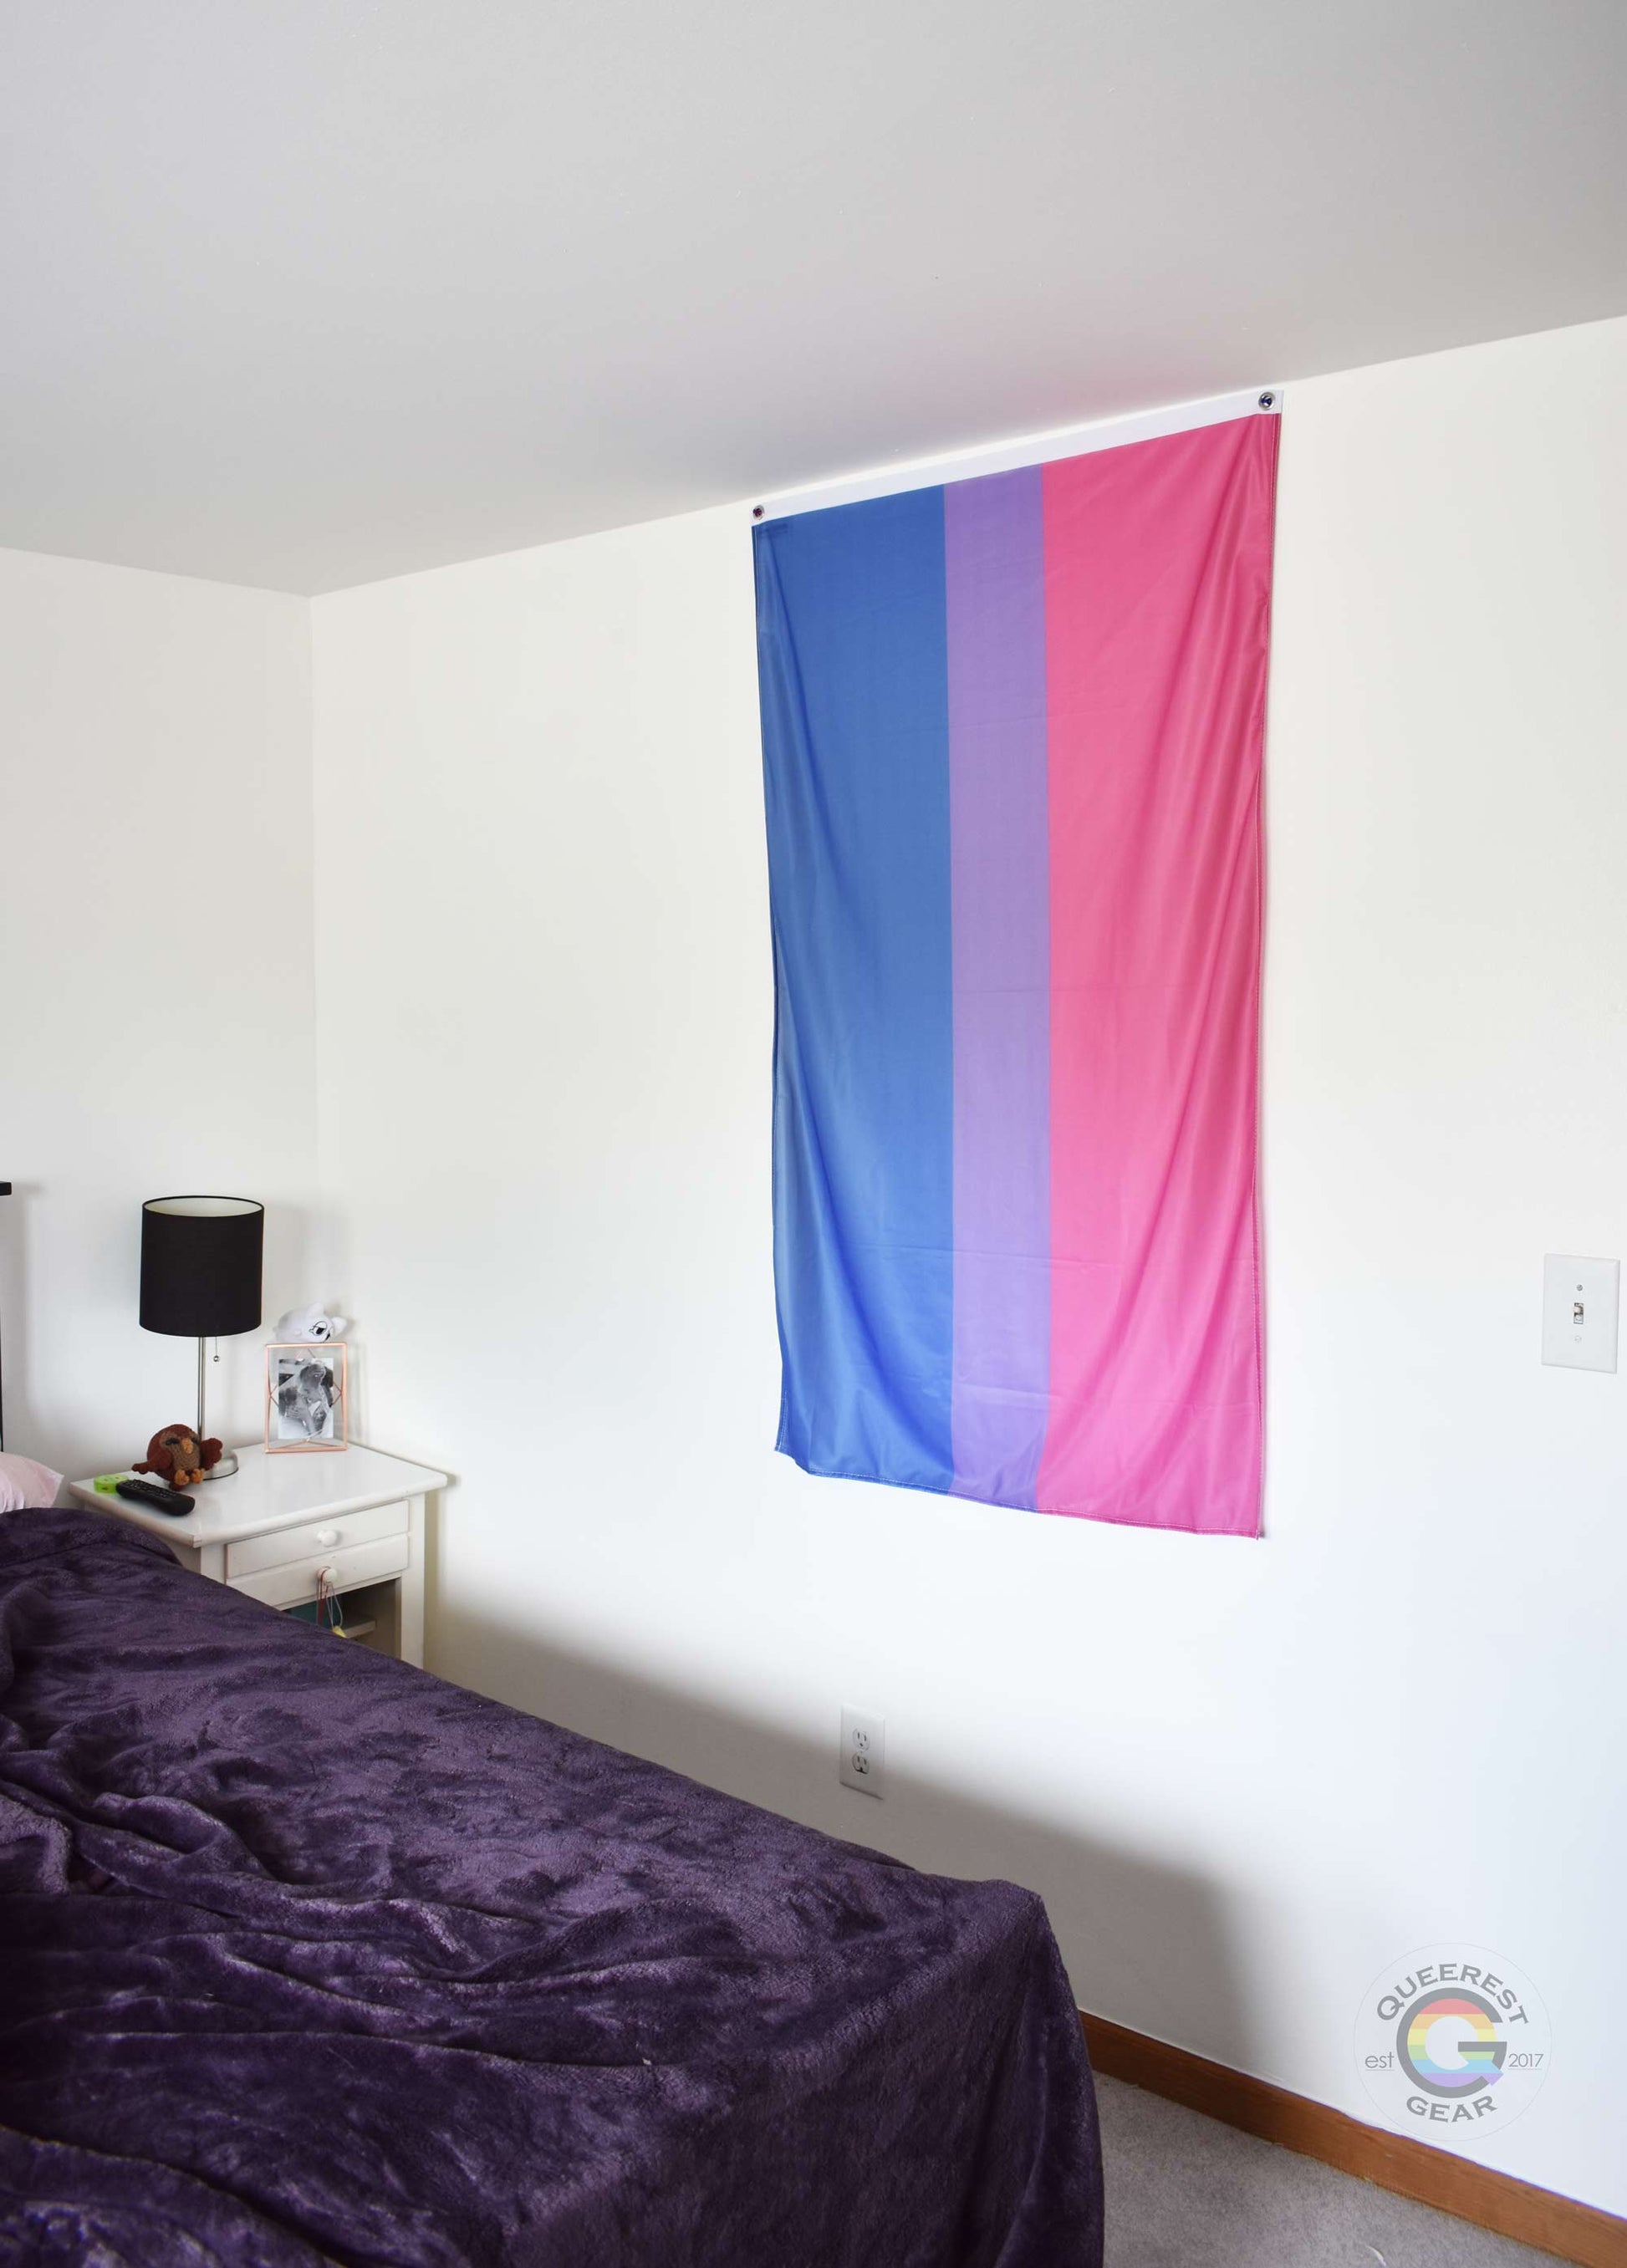  3’x5’ bisexual pride flag hanging vertically on the wall of a bedroom with a nightstand and a bed